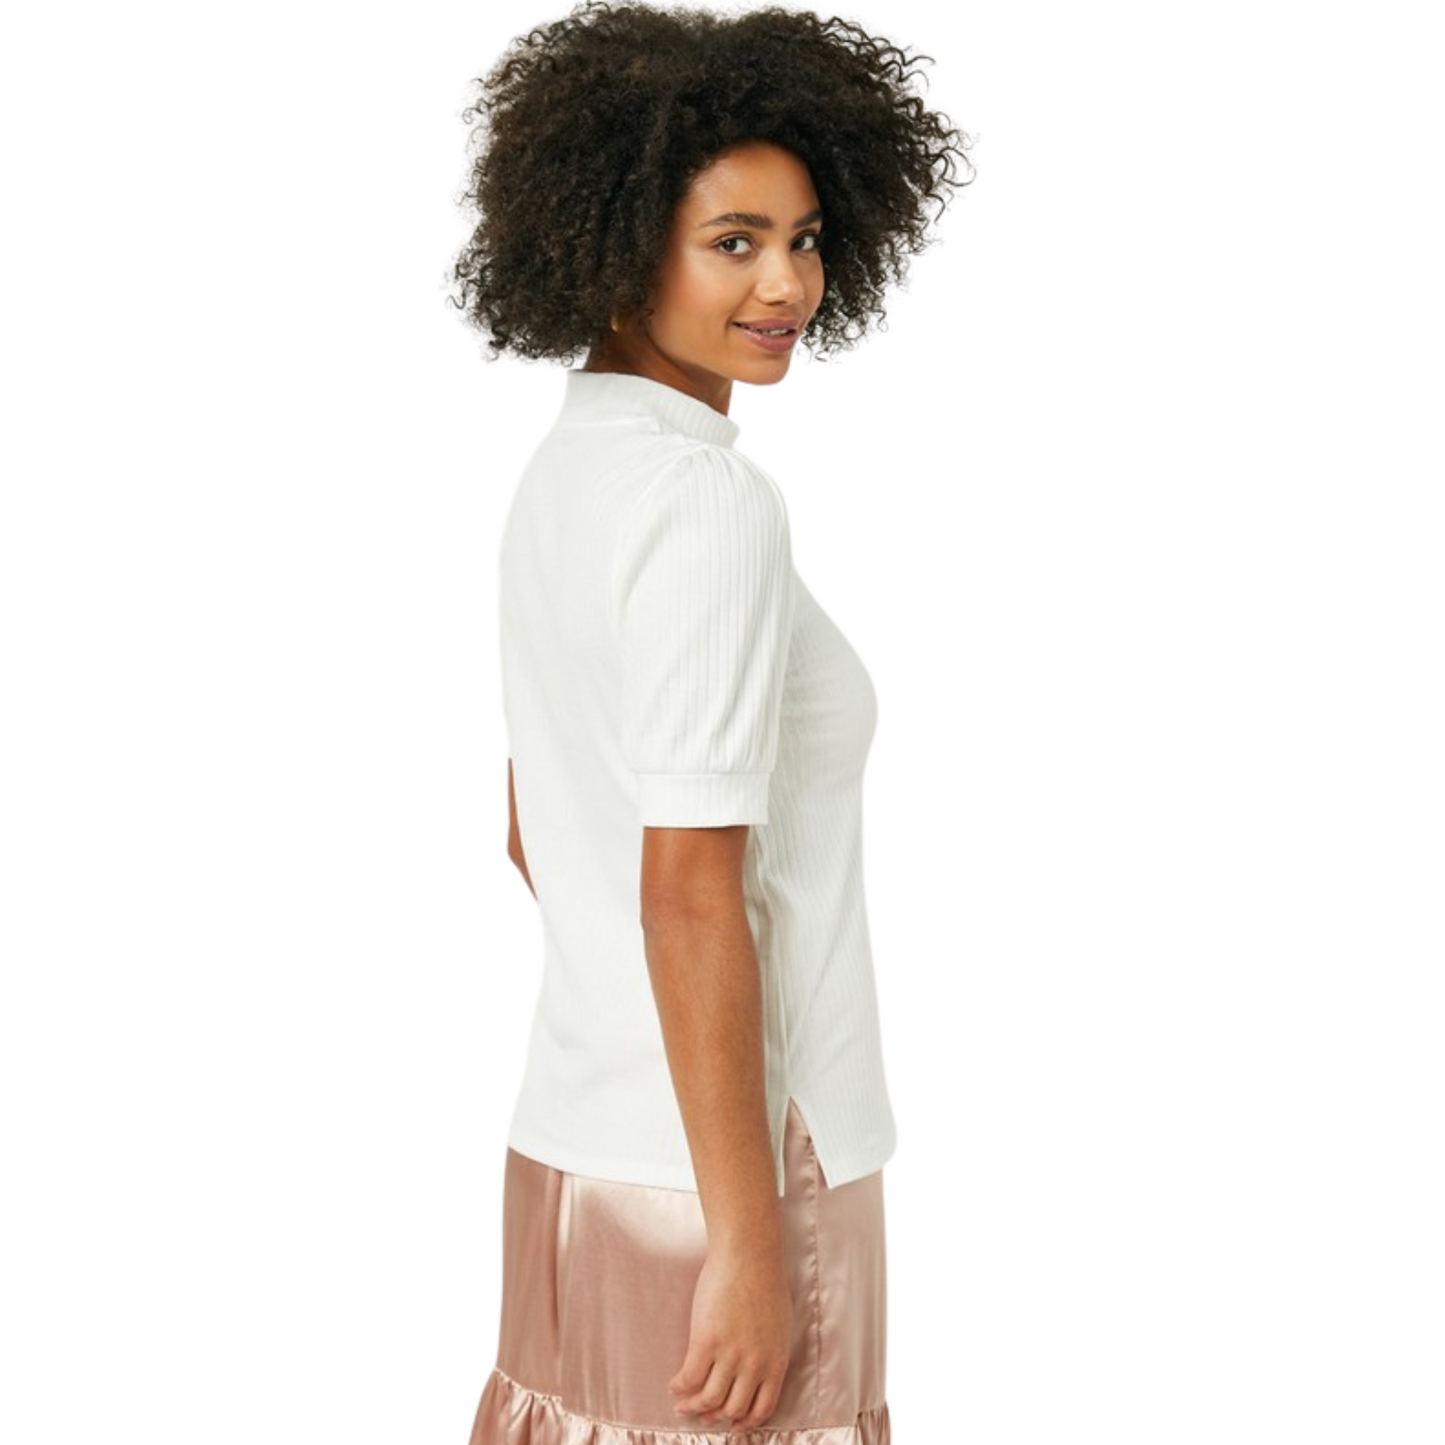 This Textured Puff Sleeve Top is crafted from a ribbed knit fabric, making it comfortable to wear. The high banded neckline and pull-on silhouette make it easy to style with any outfit. The off-white coloring is perfect for creating a soft and feminine look.